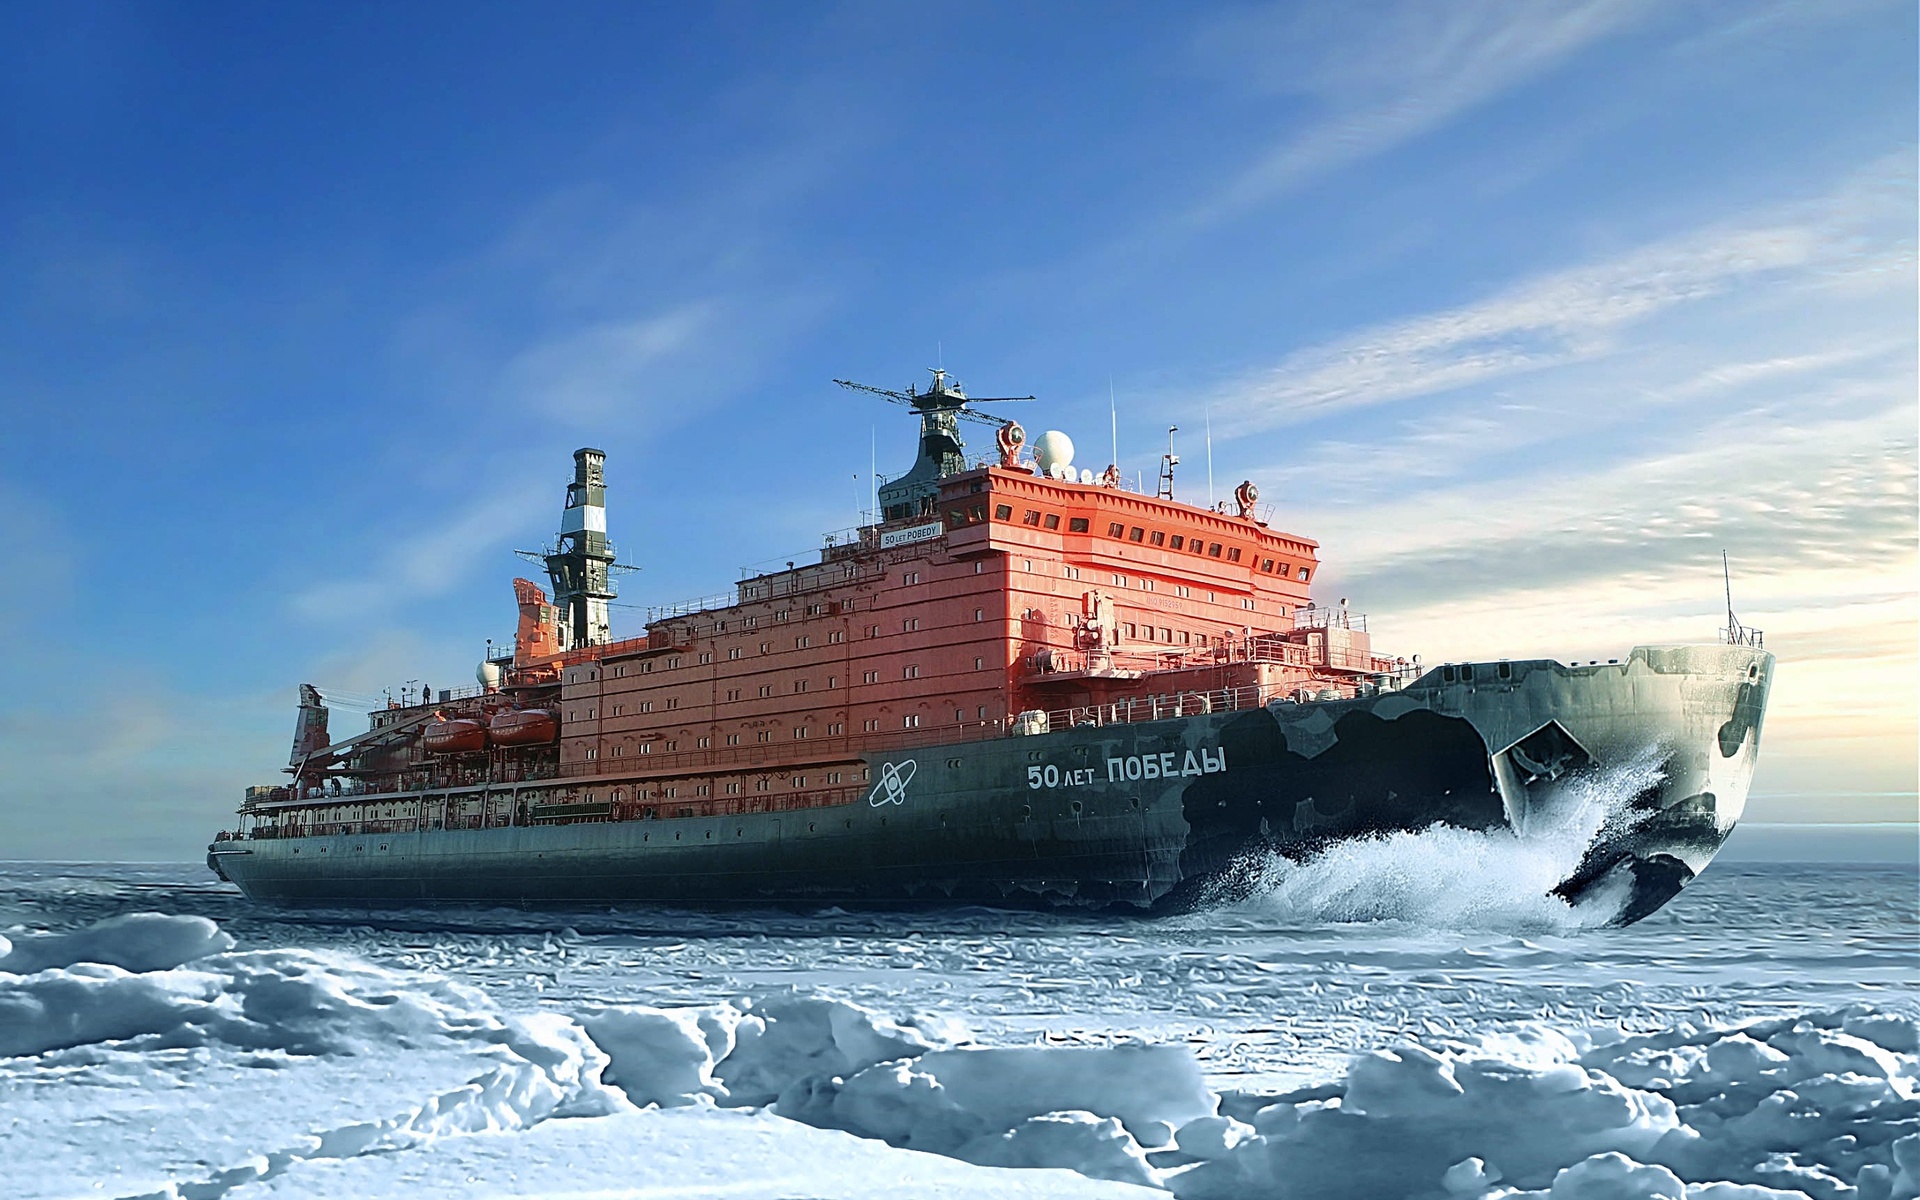 Download Wallpaper NS 50 Let Pobedy, Nuclear Powered Icebreaker, Arctic, 50 Years Of Victory, Sea For Desktop With Resolution 1920x1200. High Quality HD Picture Wallpaper